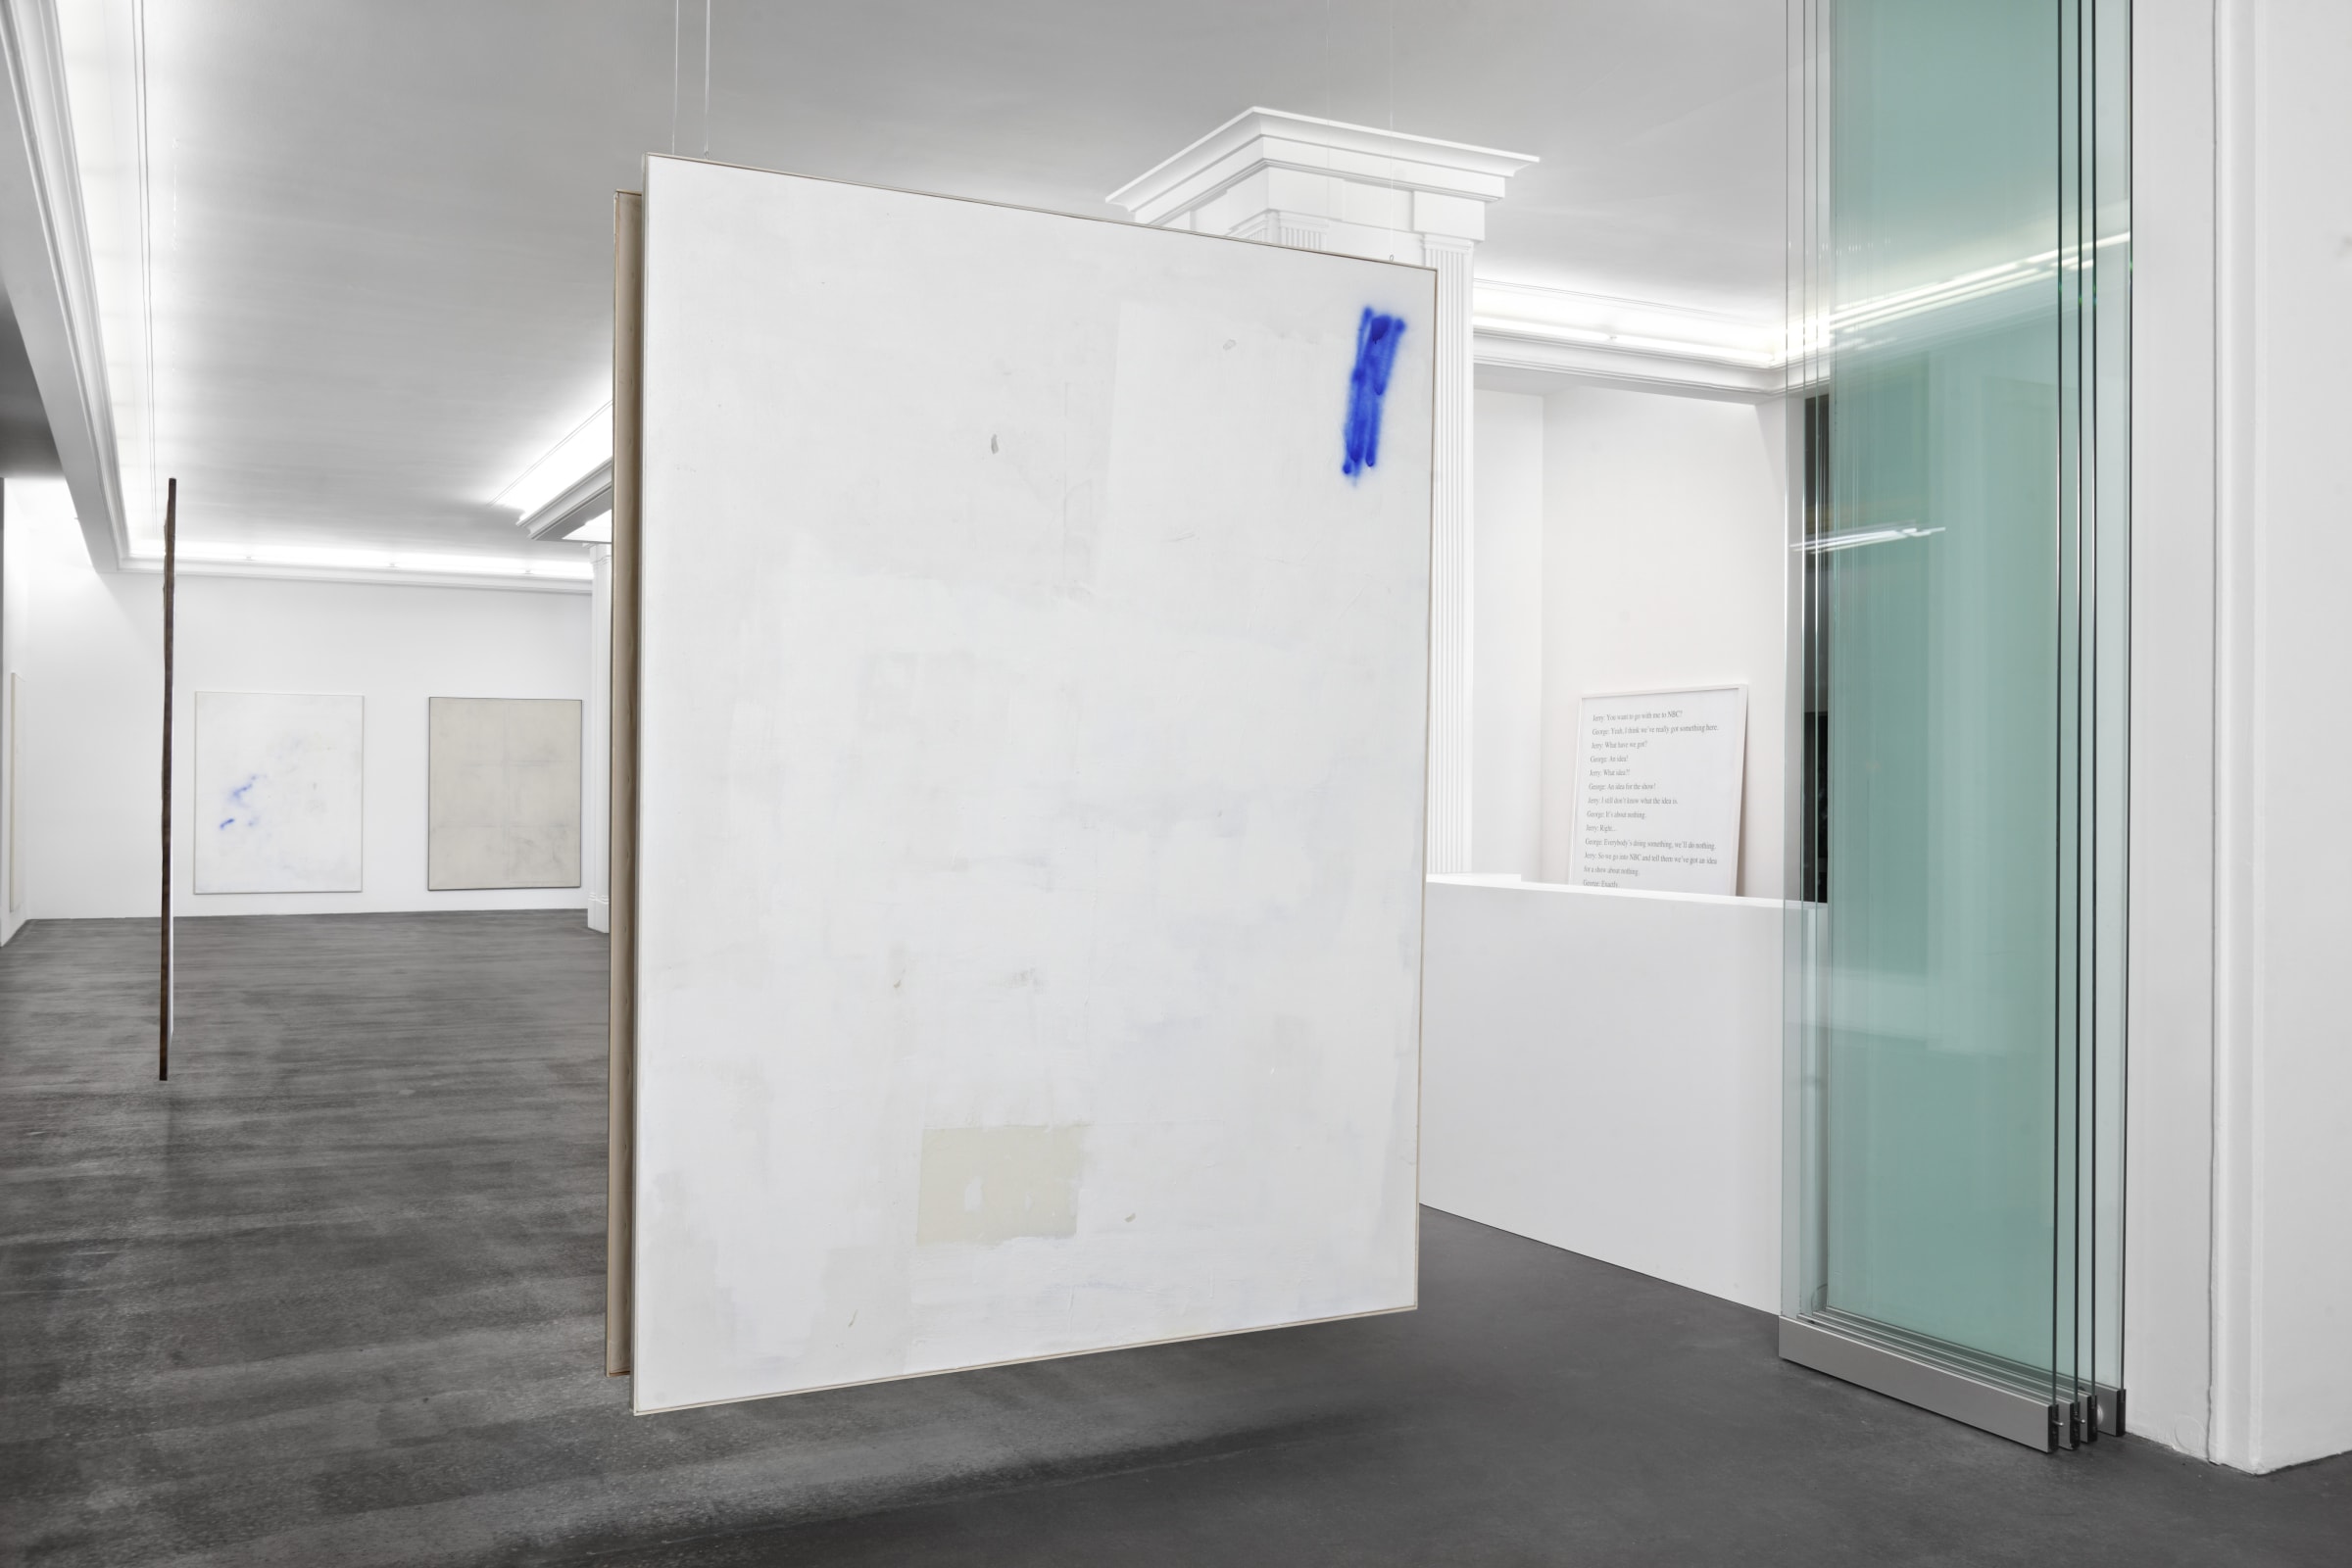 David Ostrowski ‘I’m OK.’ Moments later, he was shot Installation View March 1 - April 13, 2013 Peres Projects, Berlin